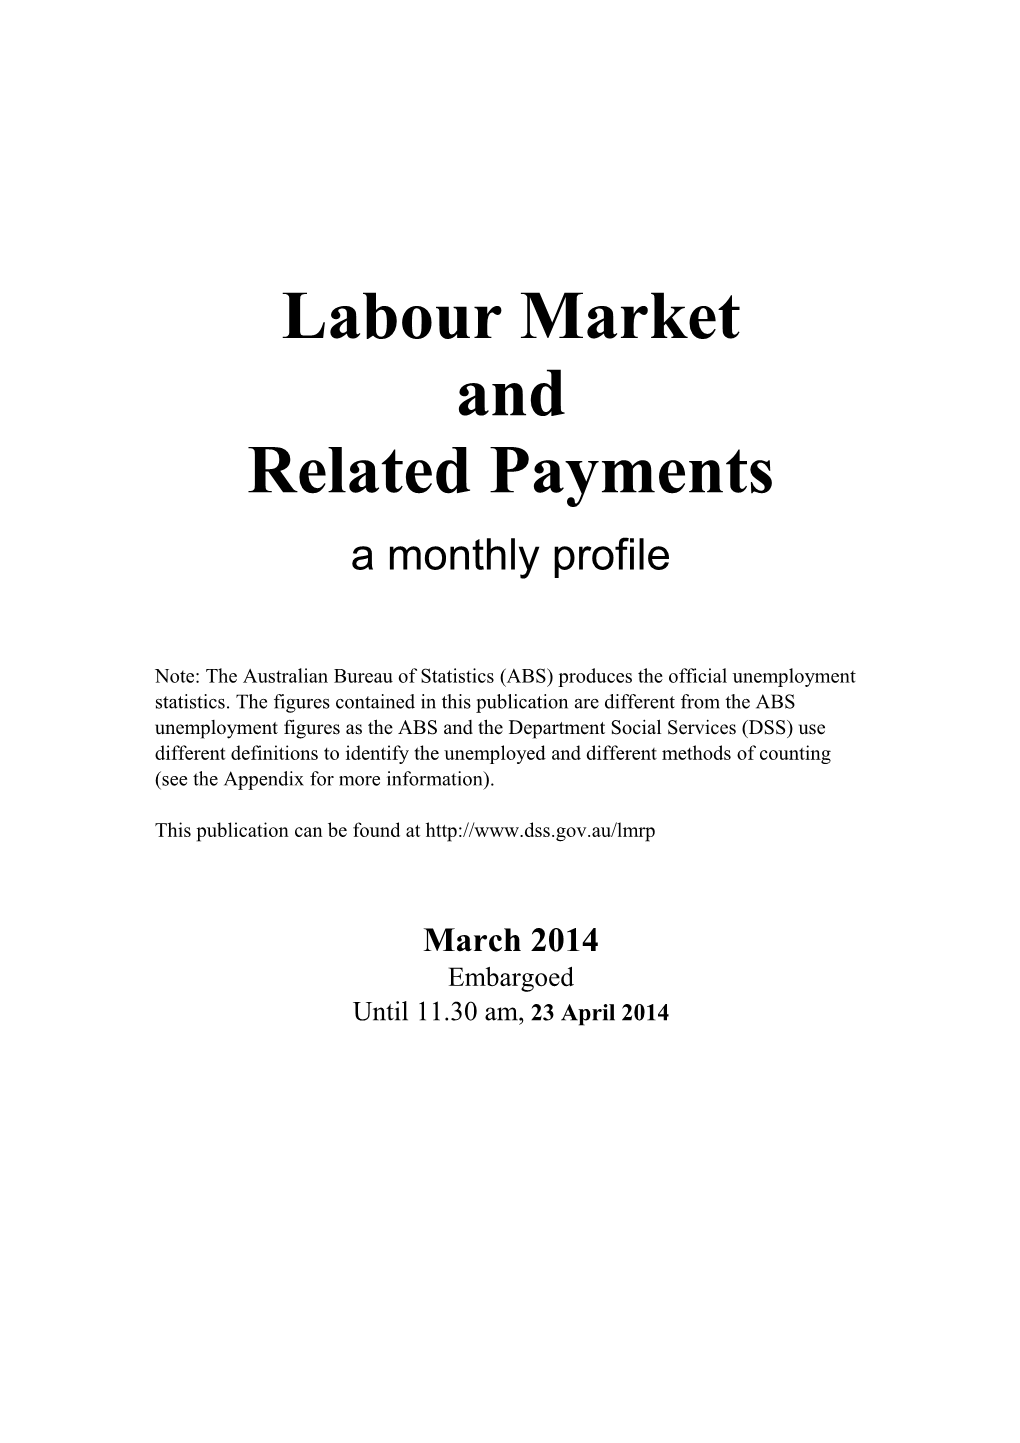 Labour Market and Related Payments March 2014